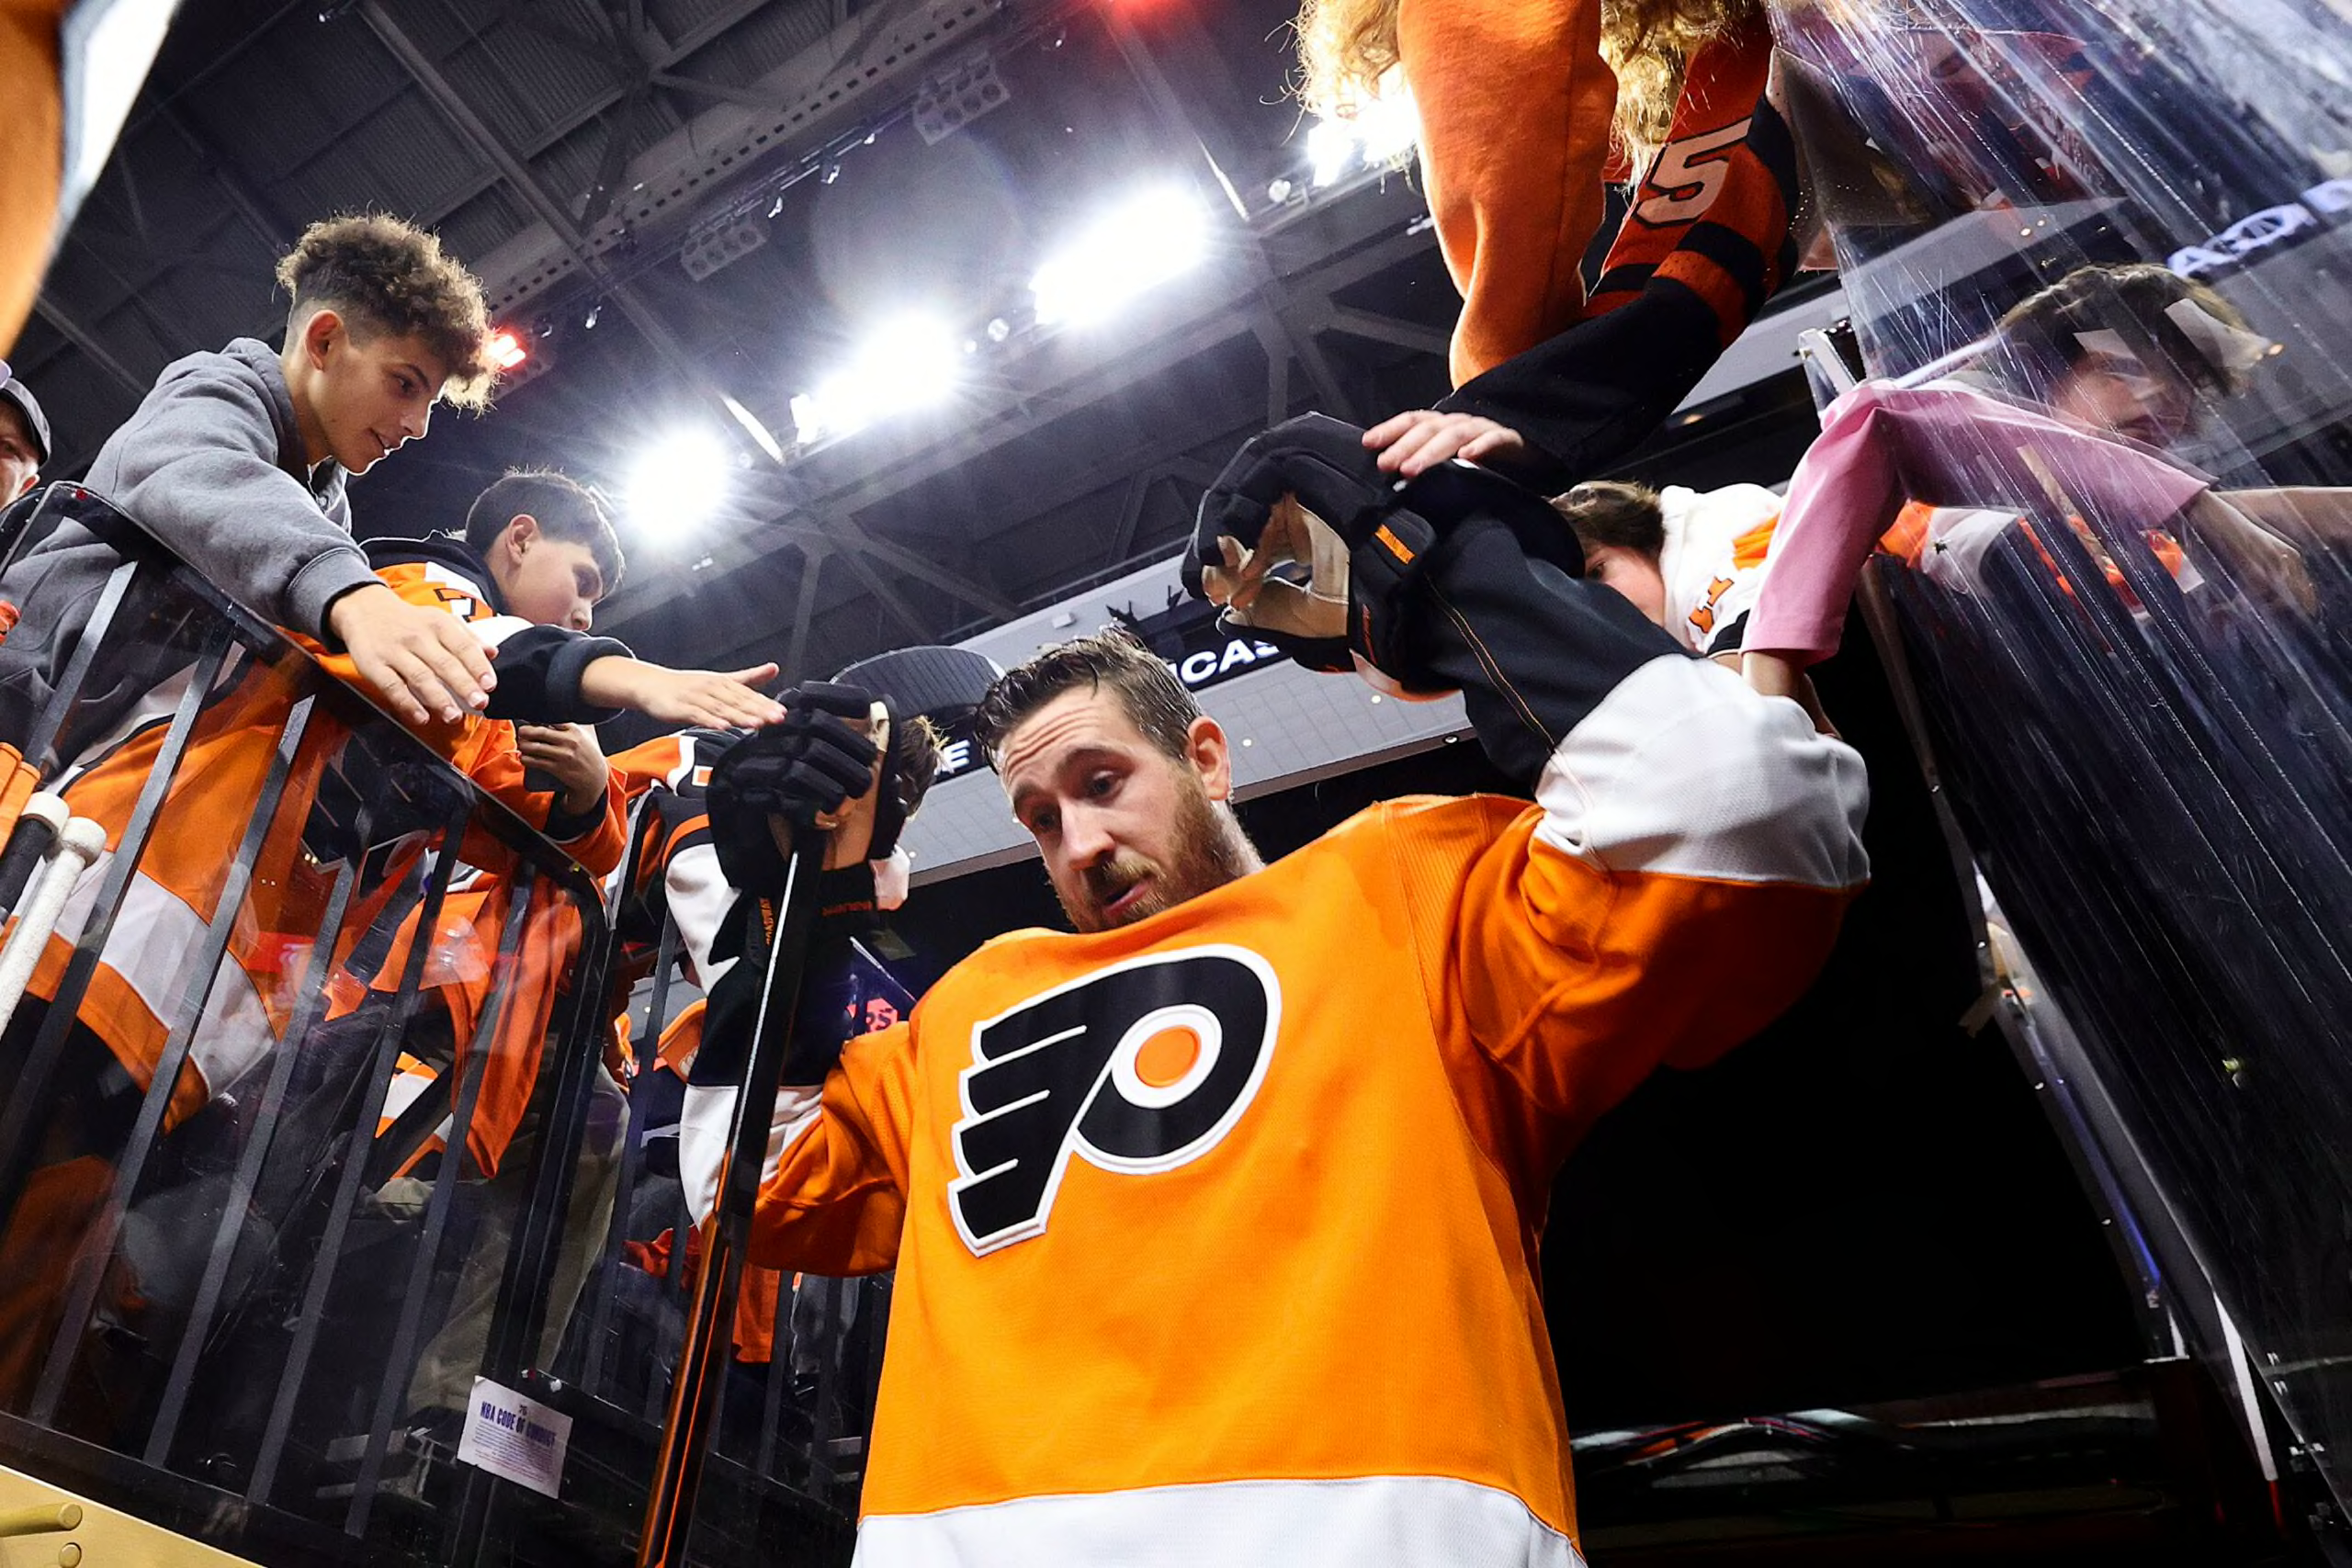 Kevin Hayes accepting that time with Flyers could be coming to an end - The  Hockey News Philadelphia Flyers News, Analysis and More